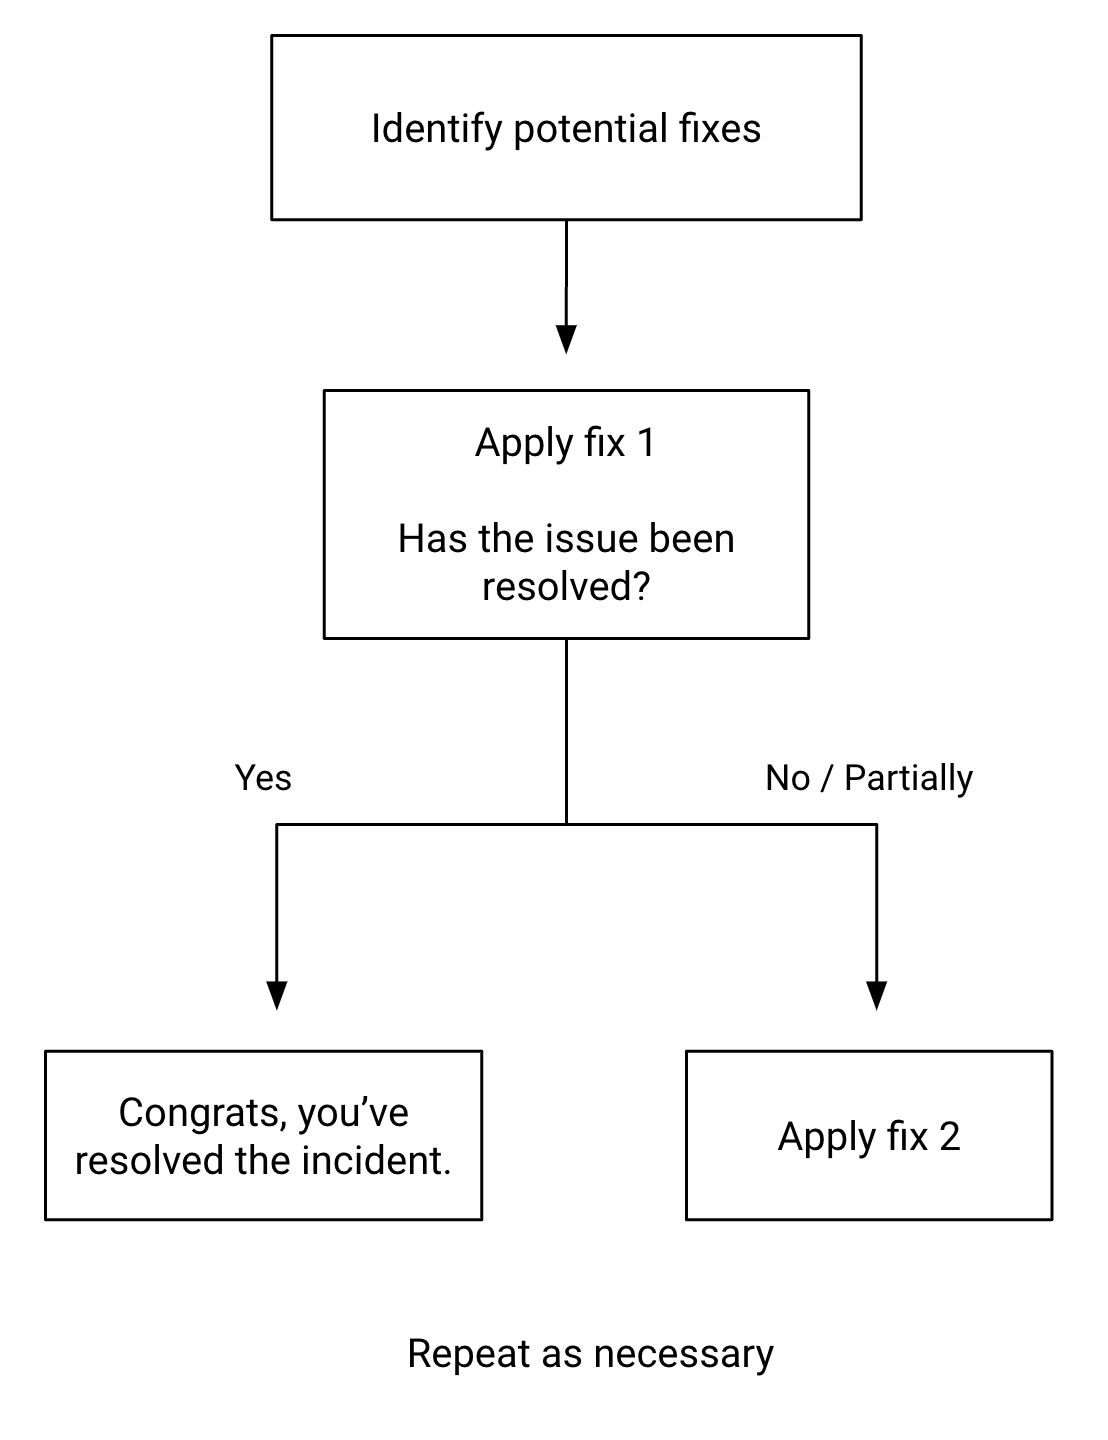 Flow chart describing process to isolate fixes. Identify potential fixes and apply the first one. If it resolves the issue, the incident is resolved. If not, proceed to apply fixes in the same manner until the incident is resolved.